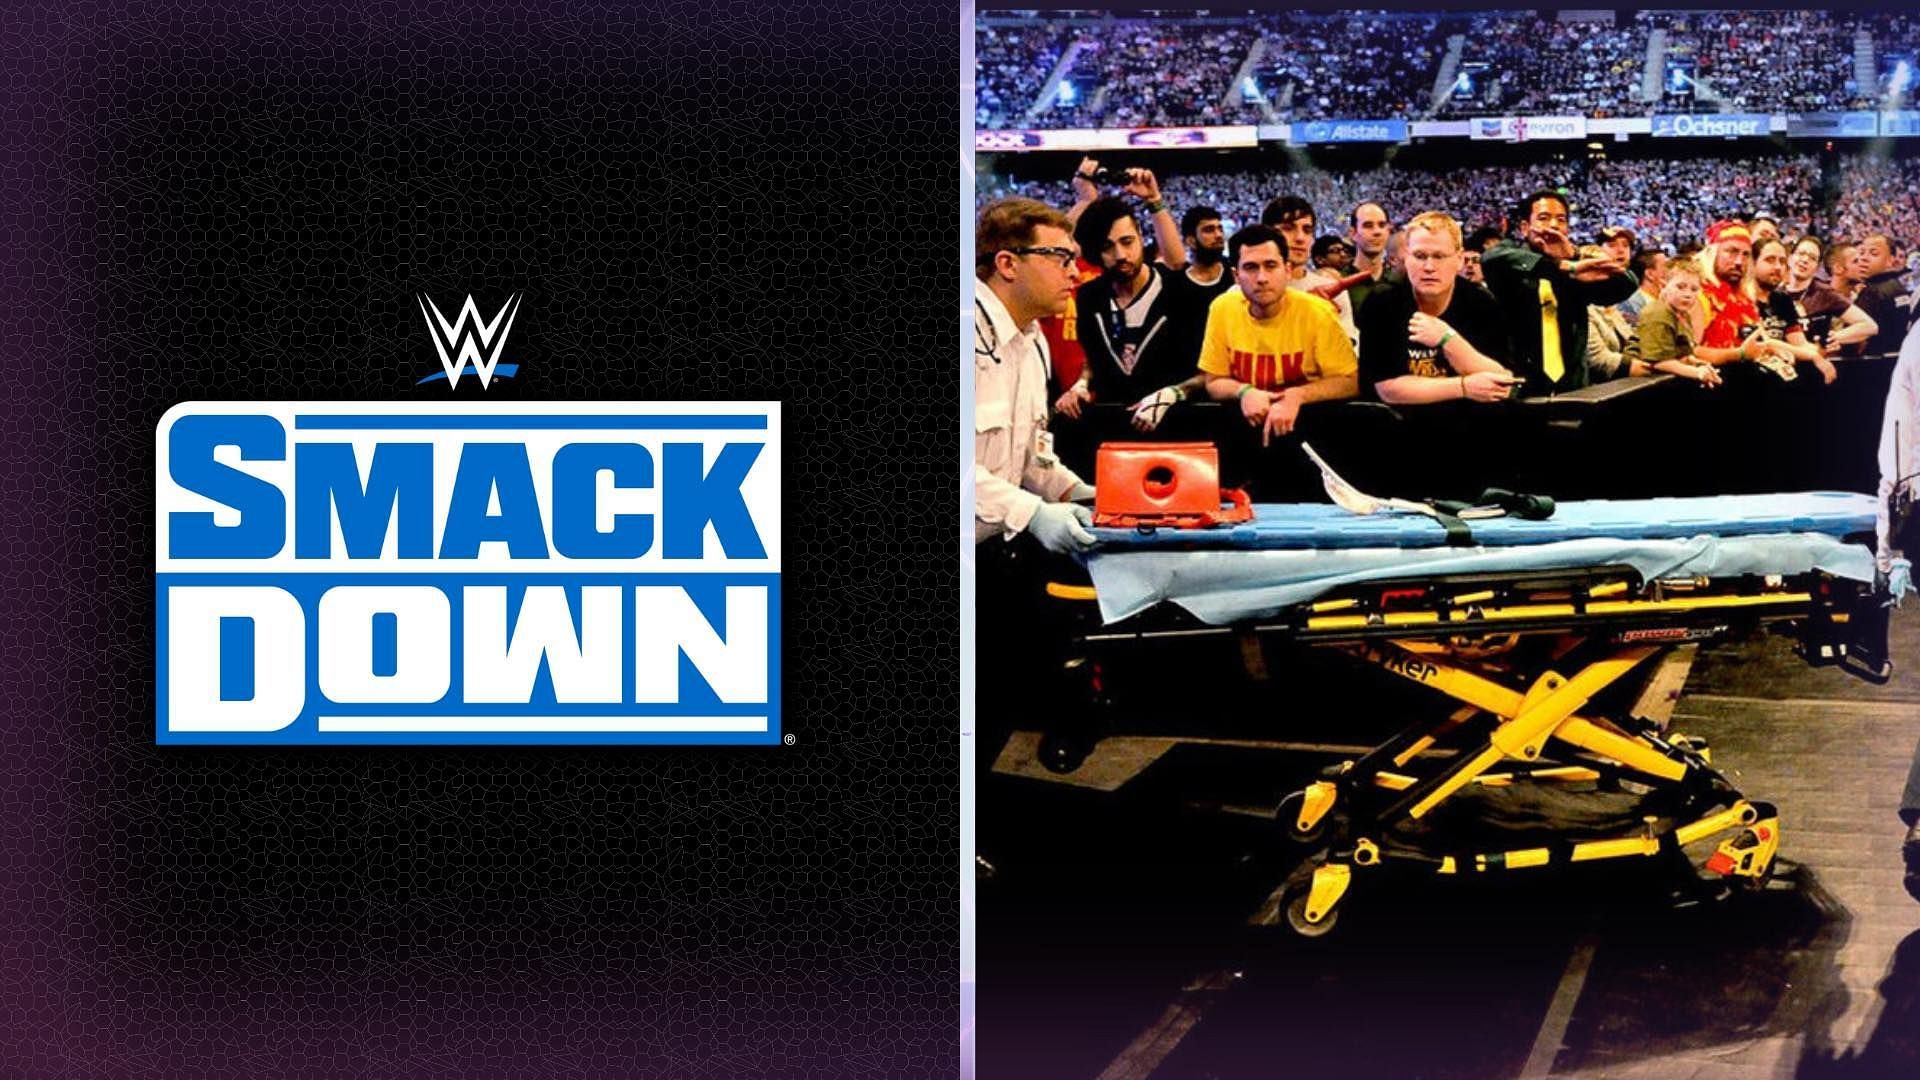 WWE SmackDown this week will be live from the Delta Center, Salt Lake City, UT